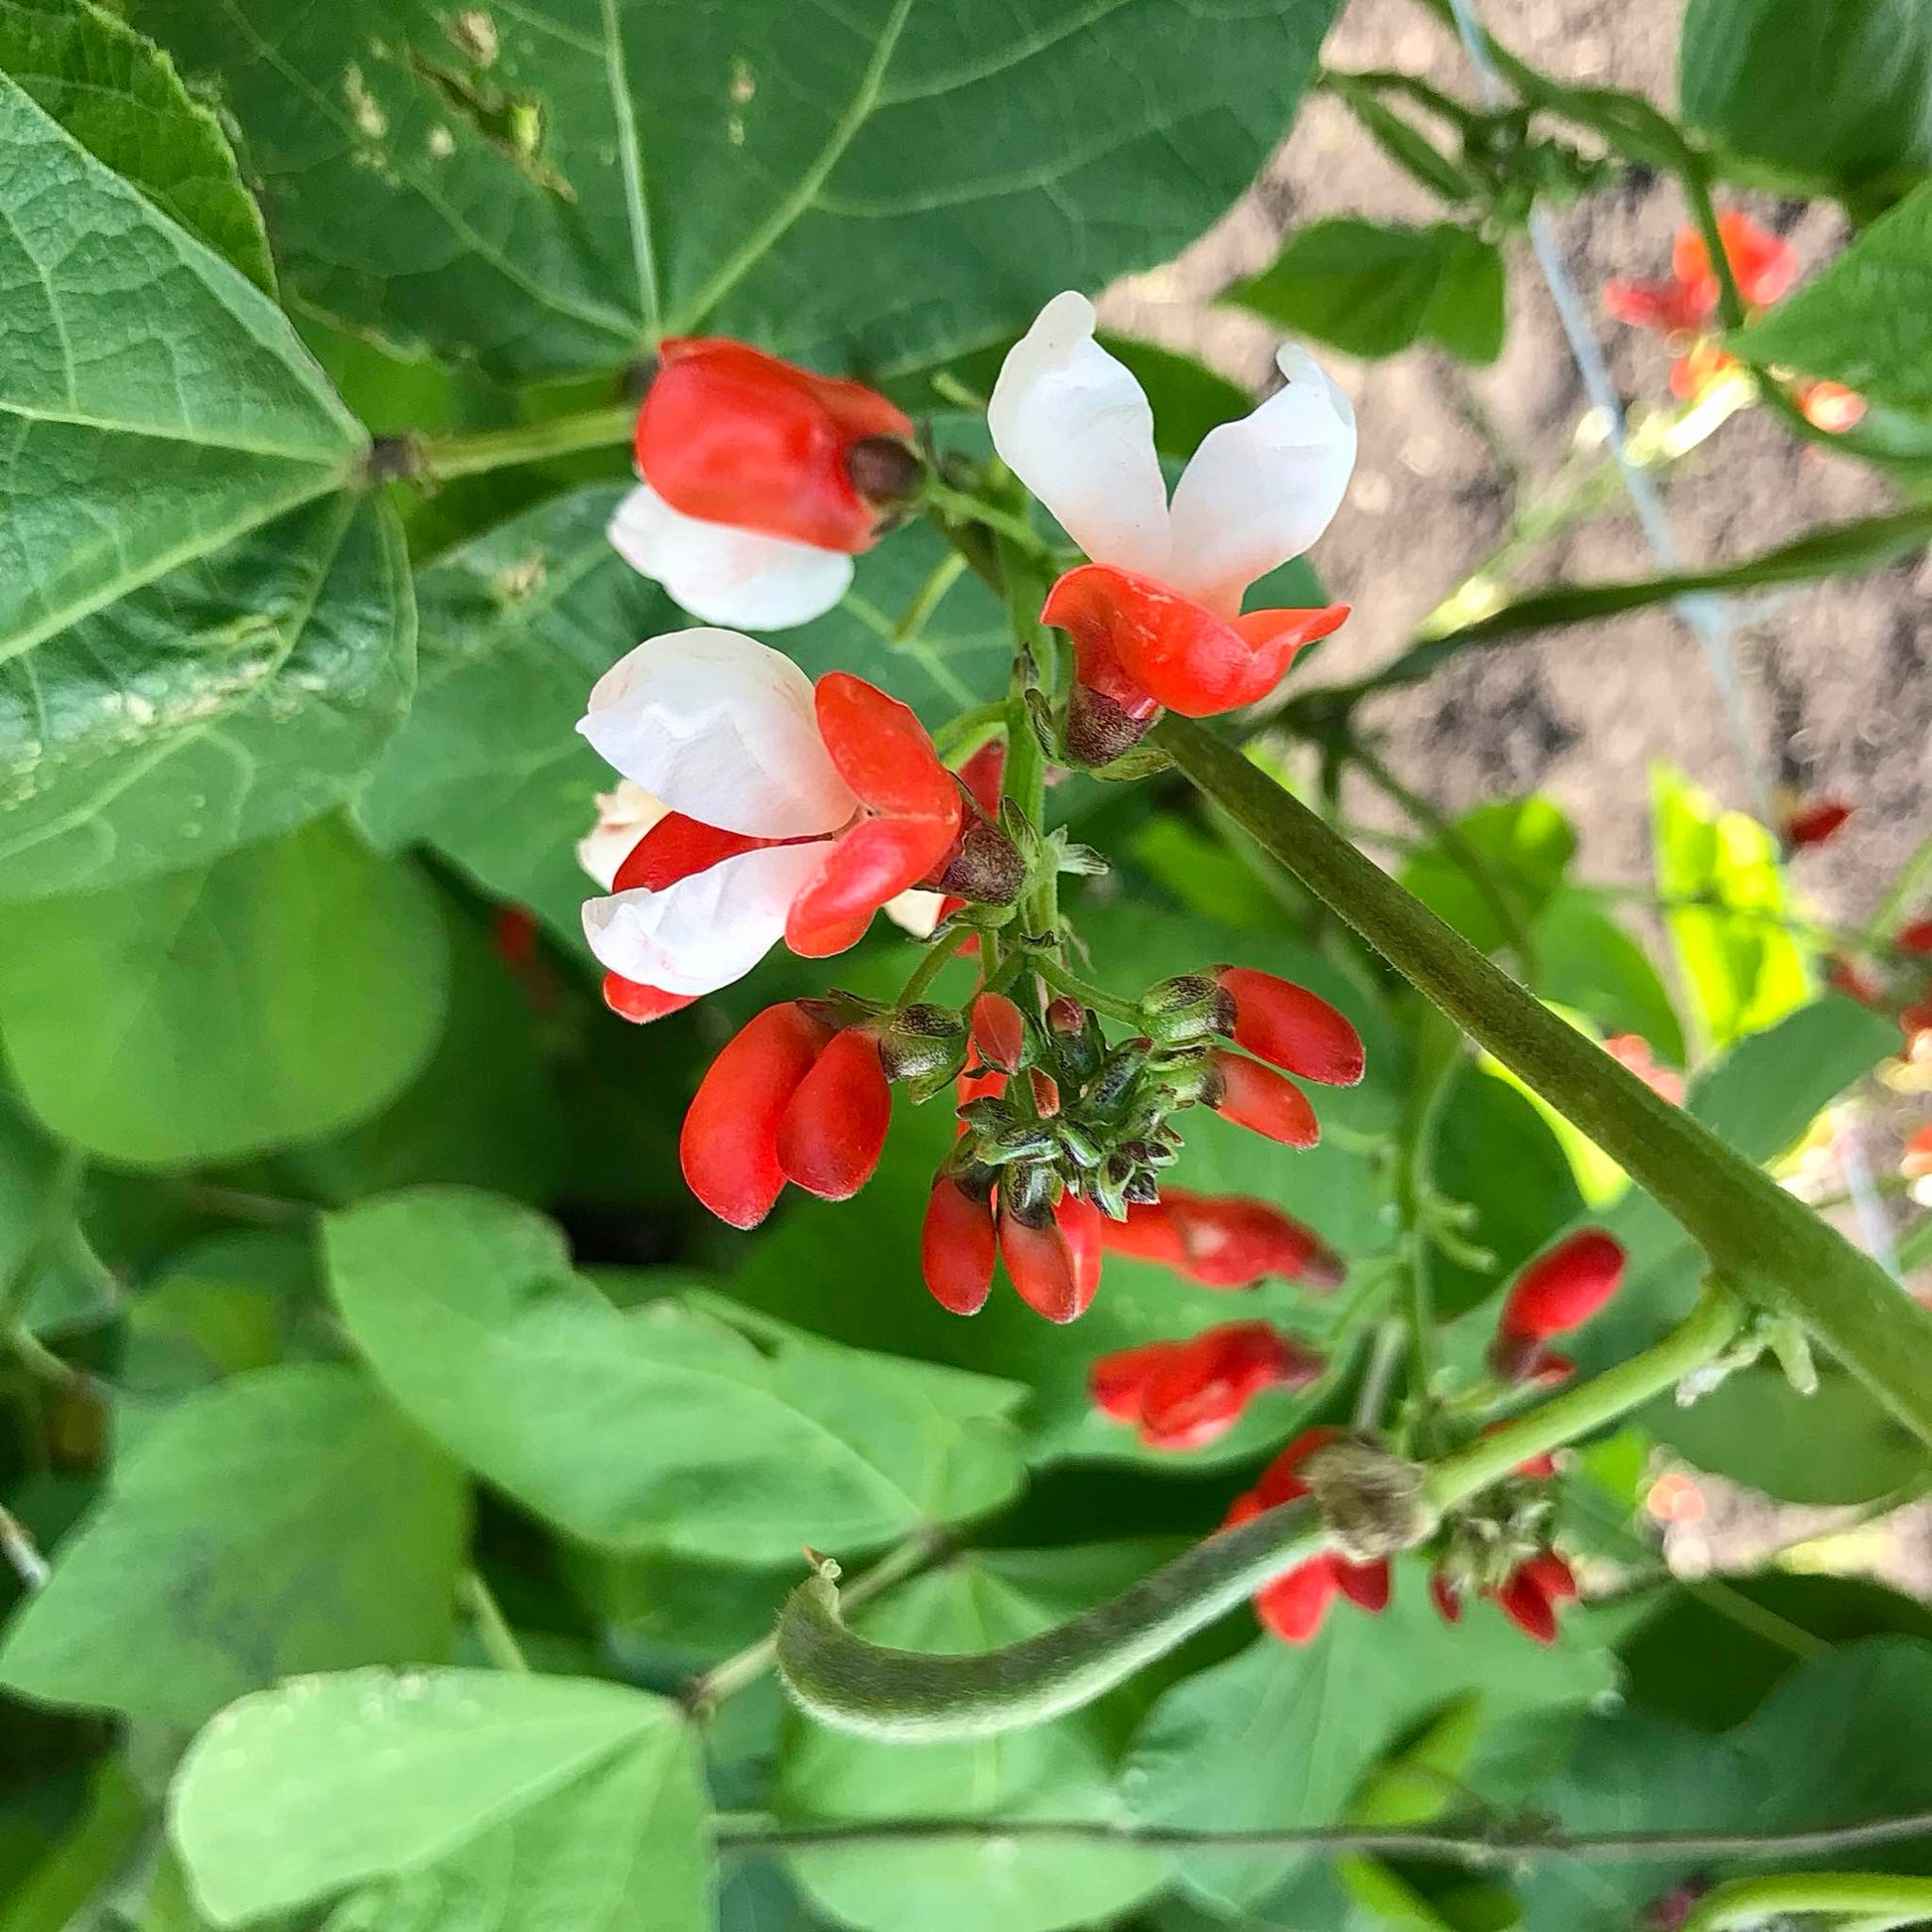 Solid red and white bicolour runner bean flower.